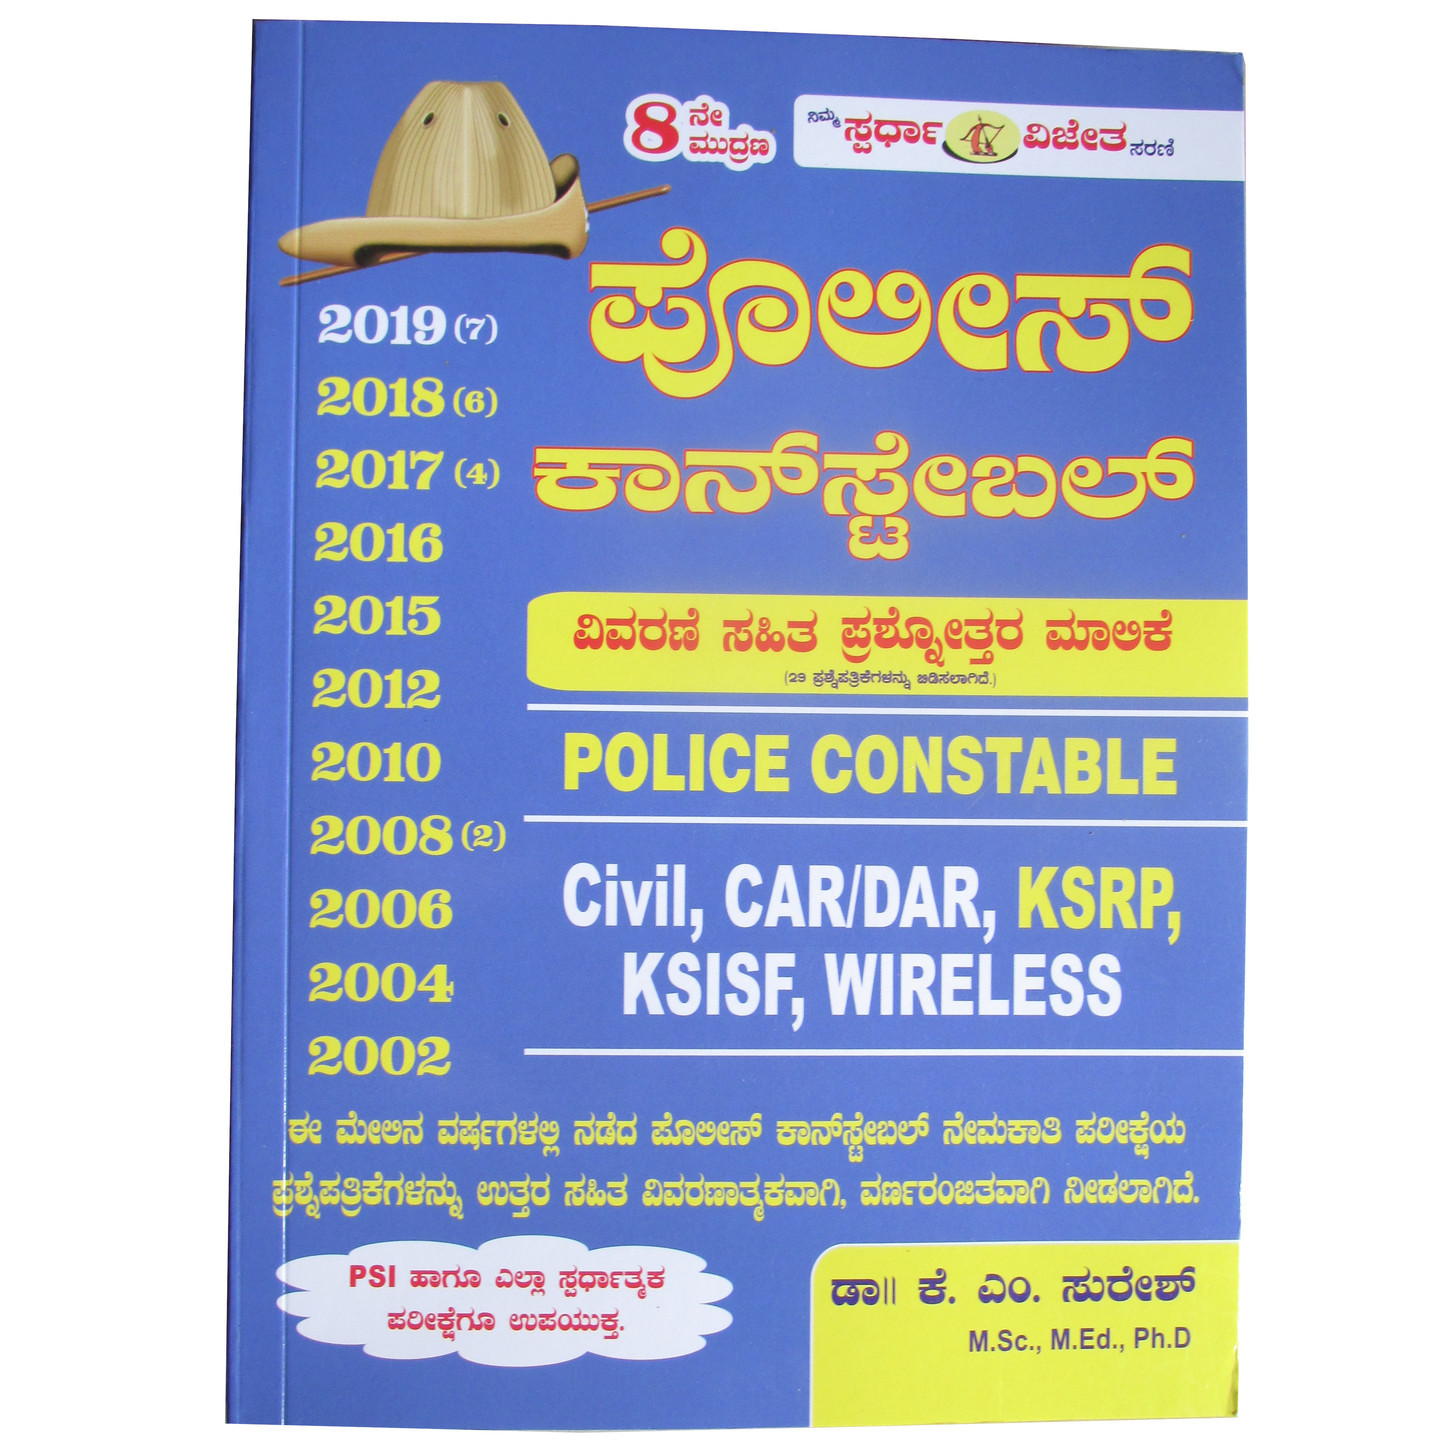 Police Constable Question Bank with Answers 2020 by Spardha Vijetha in Kannada Language - K M Suresh